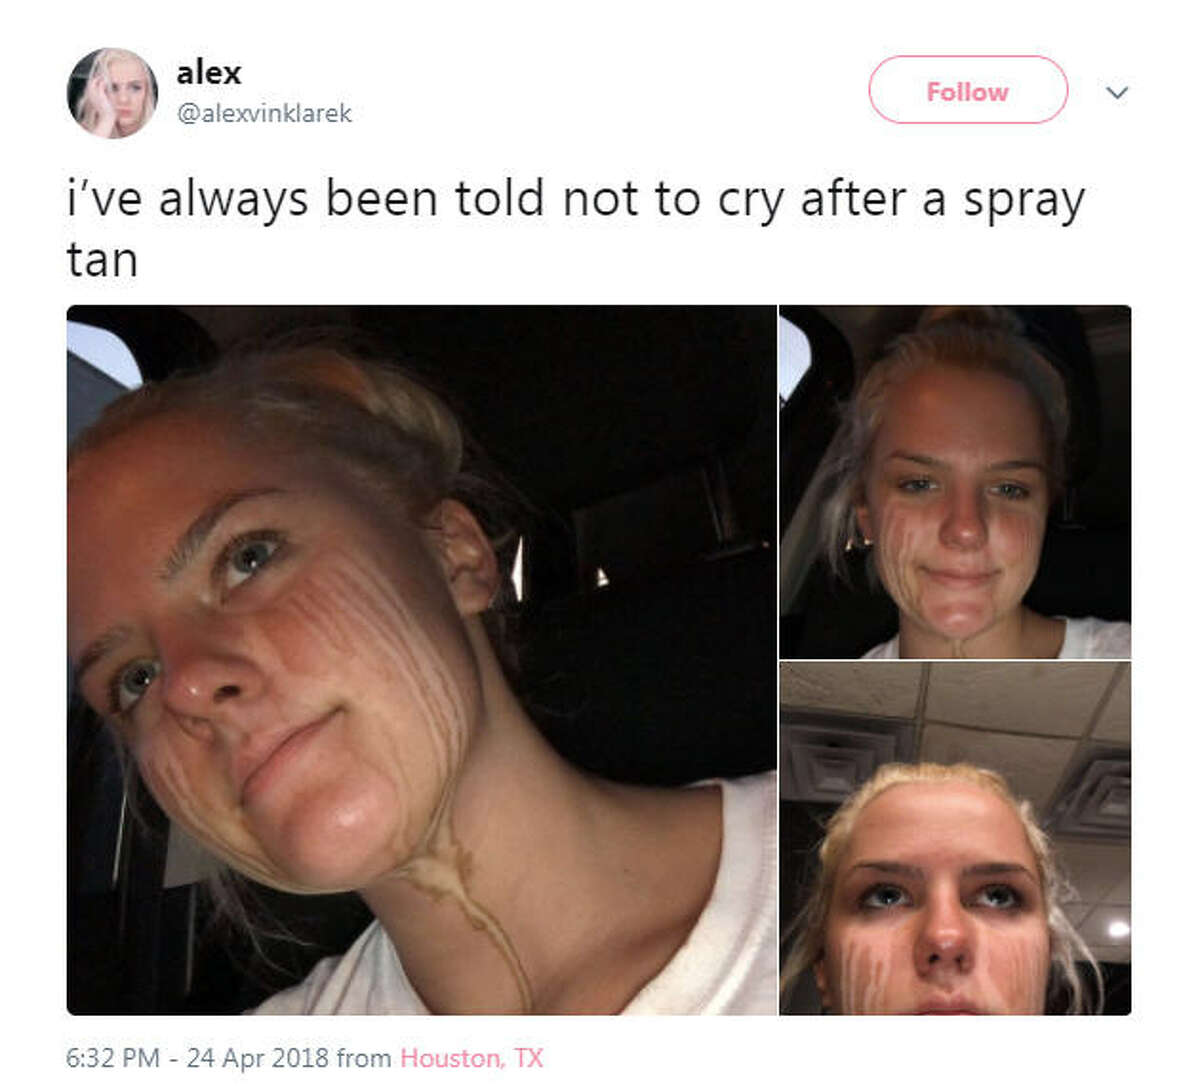 Alex Vinklarek, 17, from Houston ruined her spray tan after crying not long after it was applied. She shared her experience with Twitter and her tweet wen viral with more than 20,000 retweets and dozens relating with her struggle. Source: Twitter